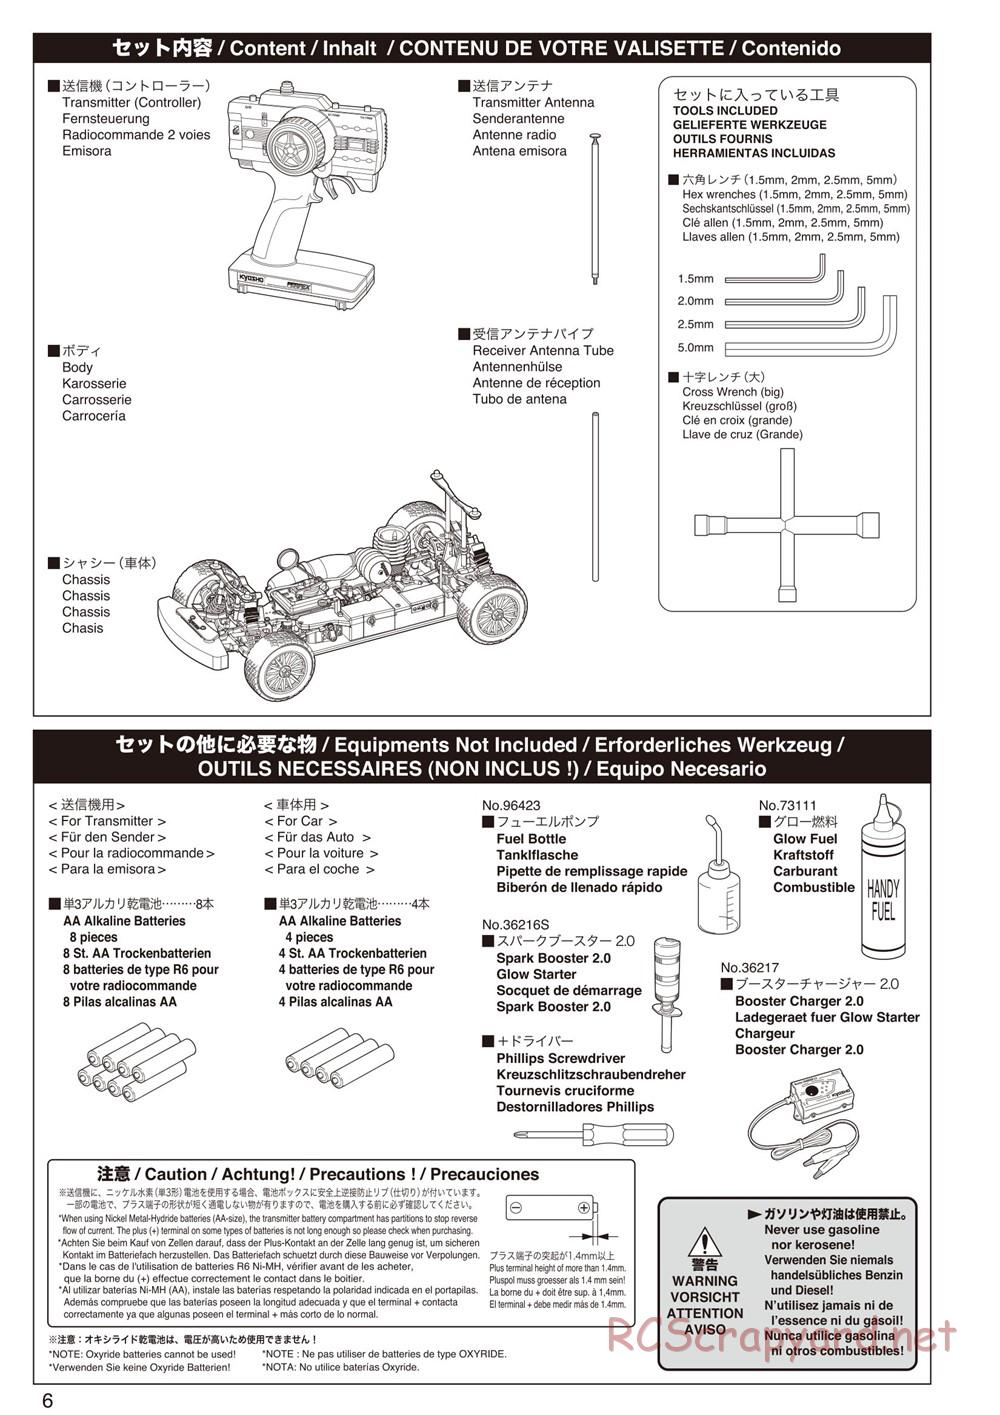 Kyosho - DRX - Manual - Page 6